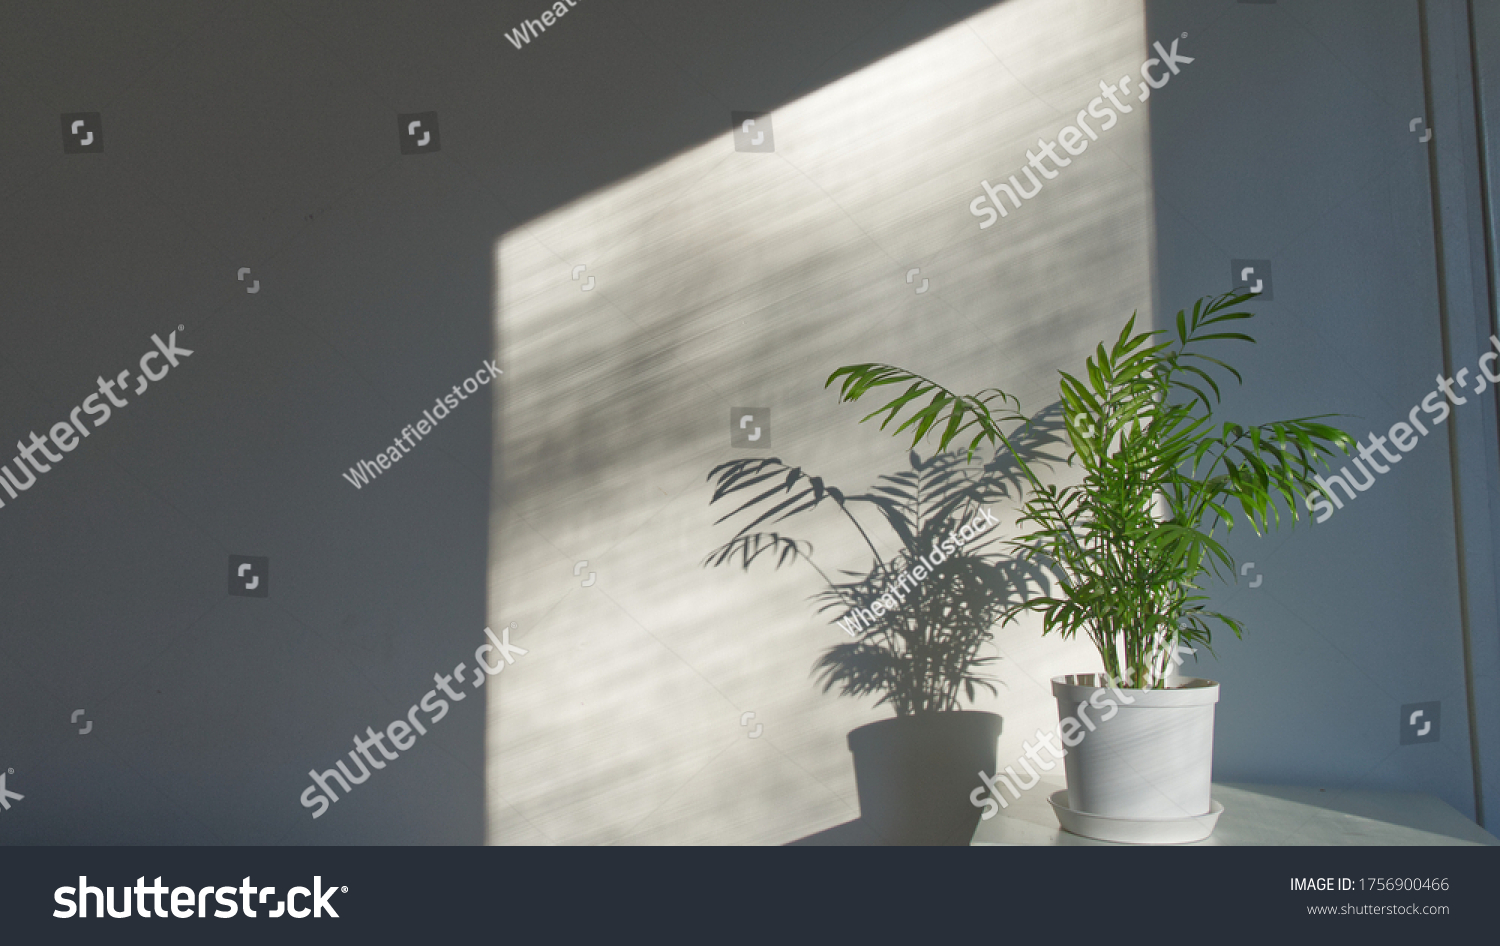 Potted plant, chamaedorea elegans, sunlight on parlor palm by wall near window #1756900466